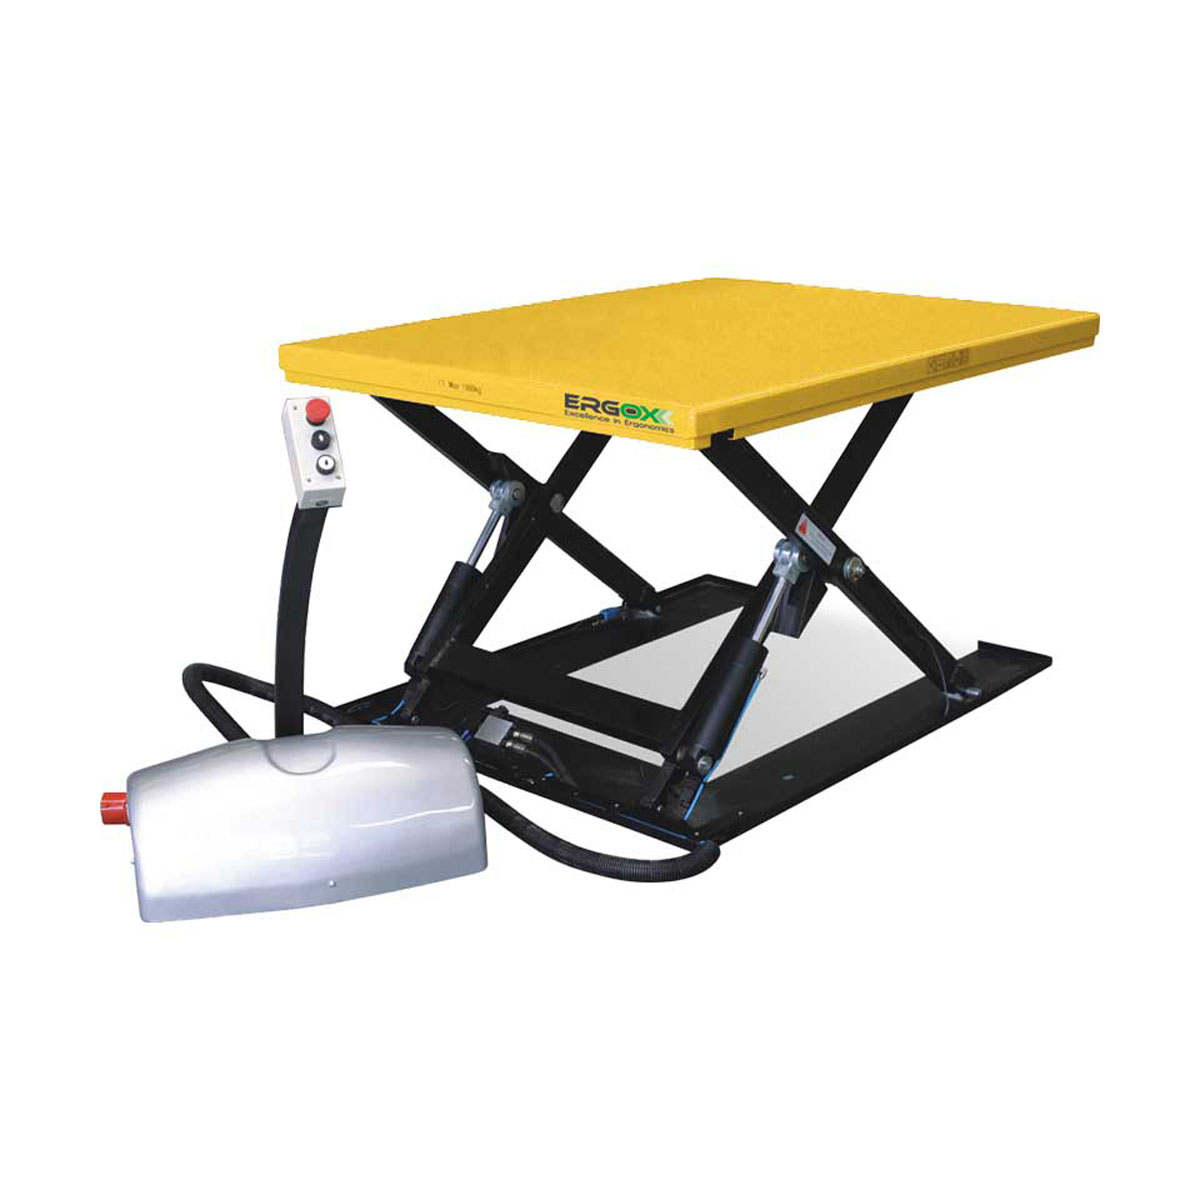 Scissor Lift Table Low Entry-Level (Electric)